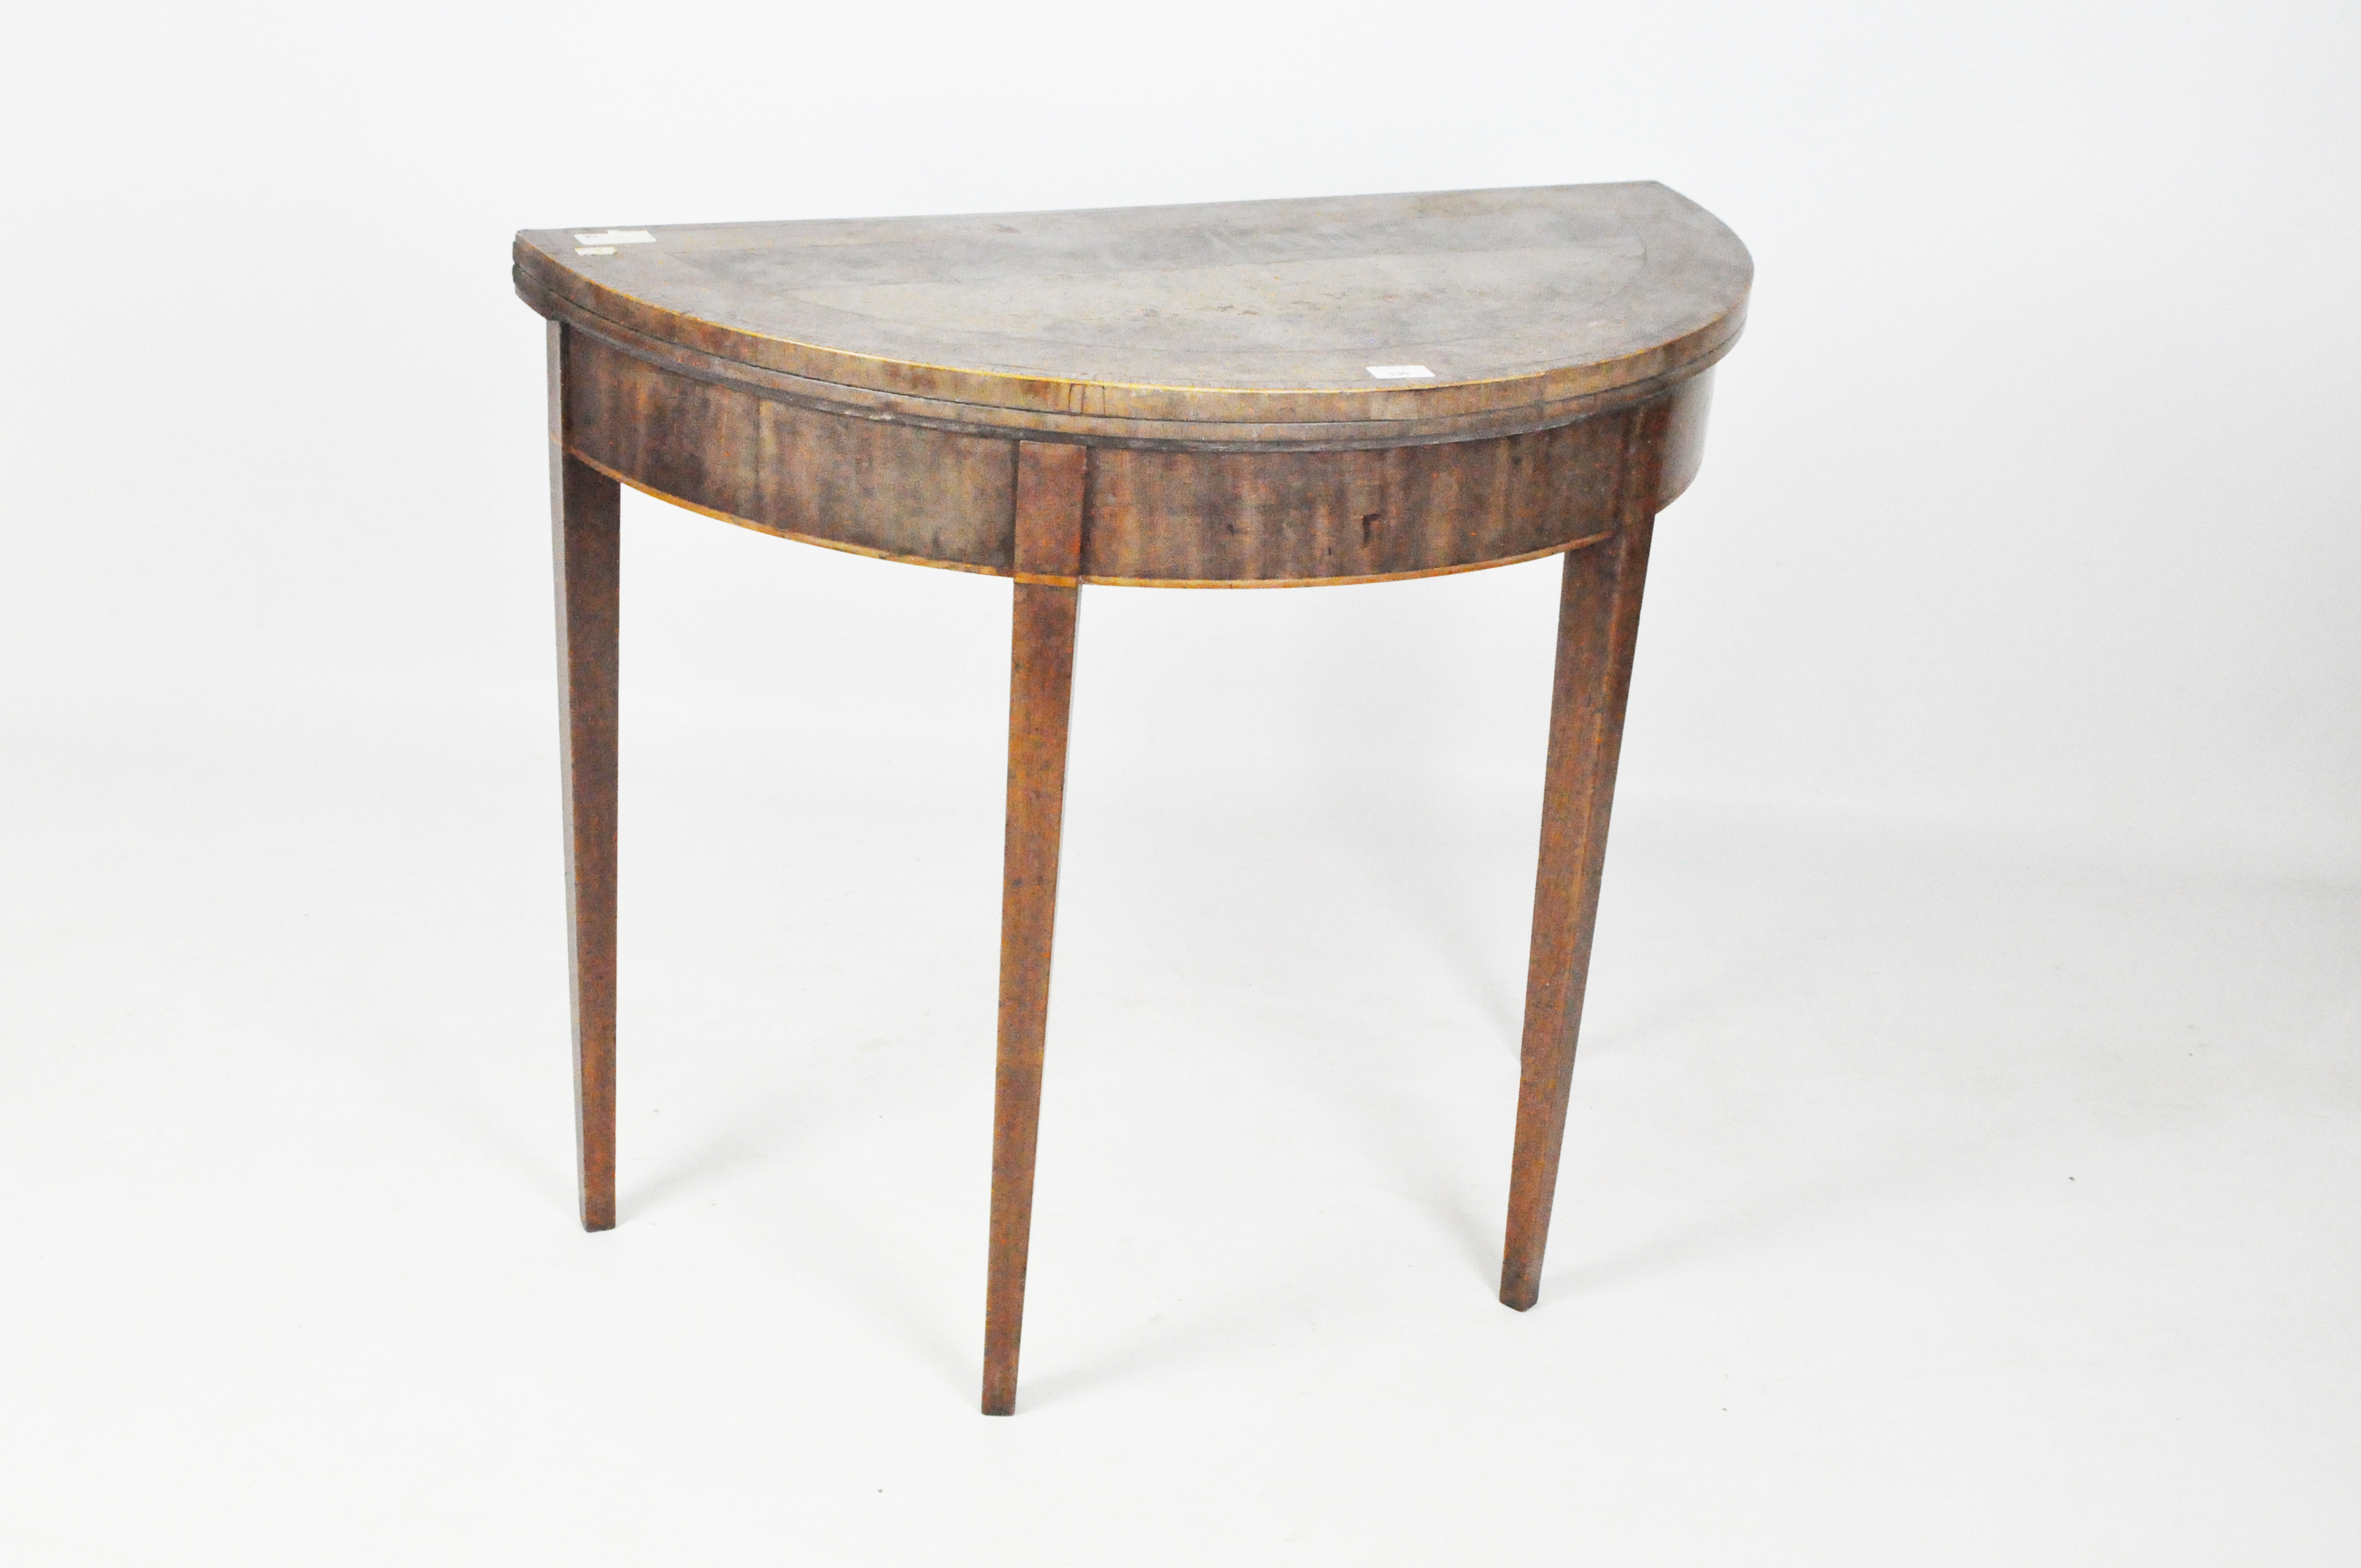 An early 19th century mahogany demi-lune table with cross banded top, - Image 2 of 2